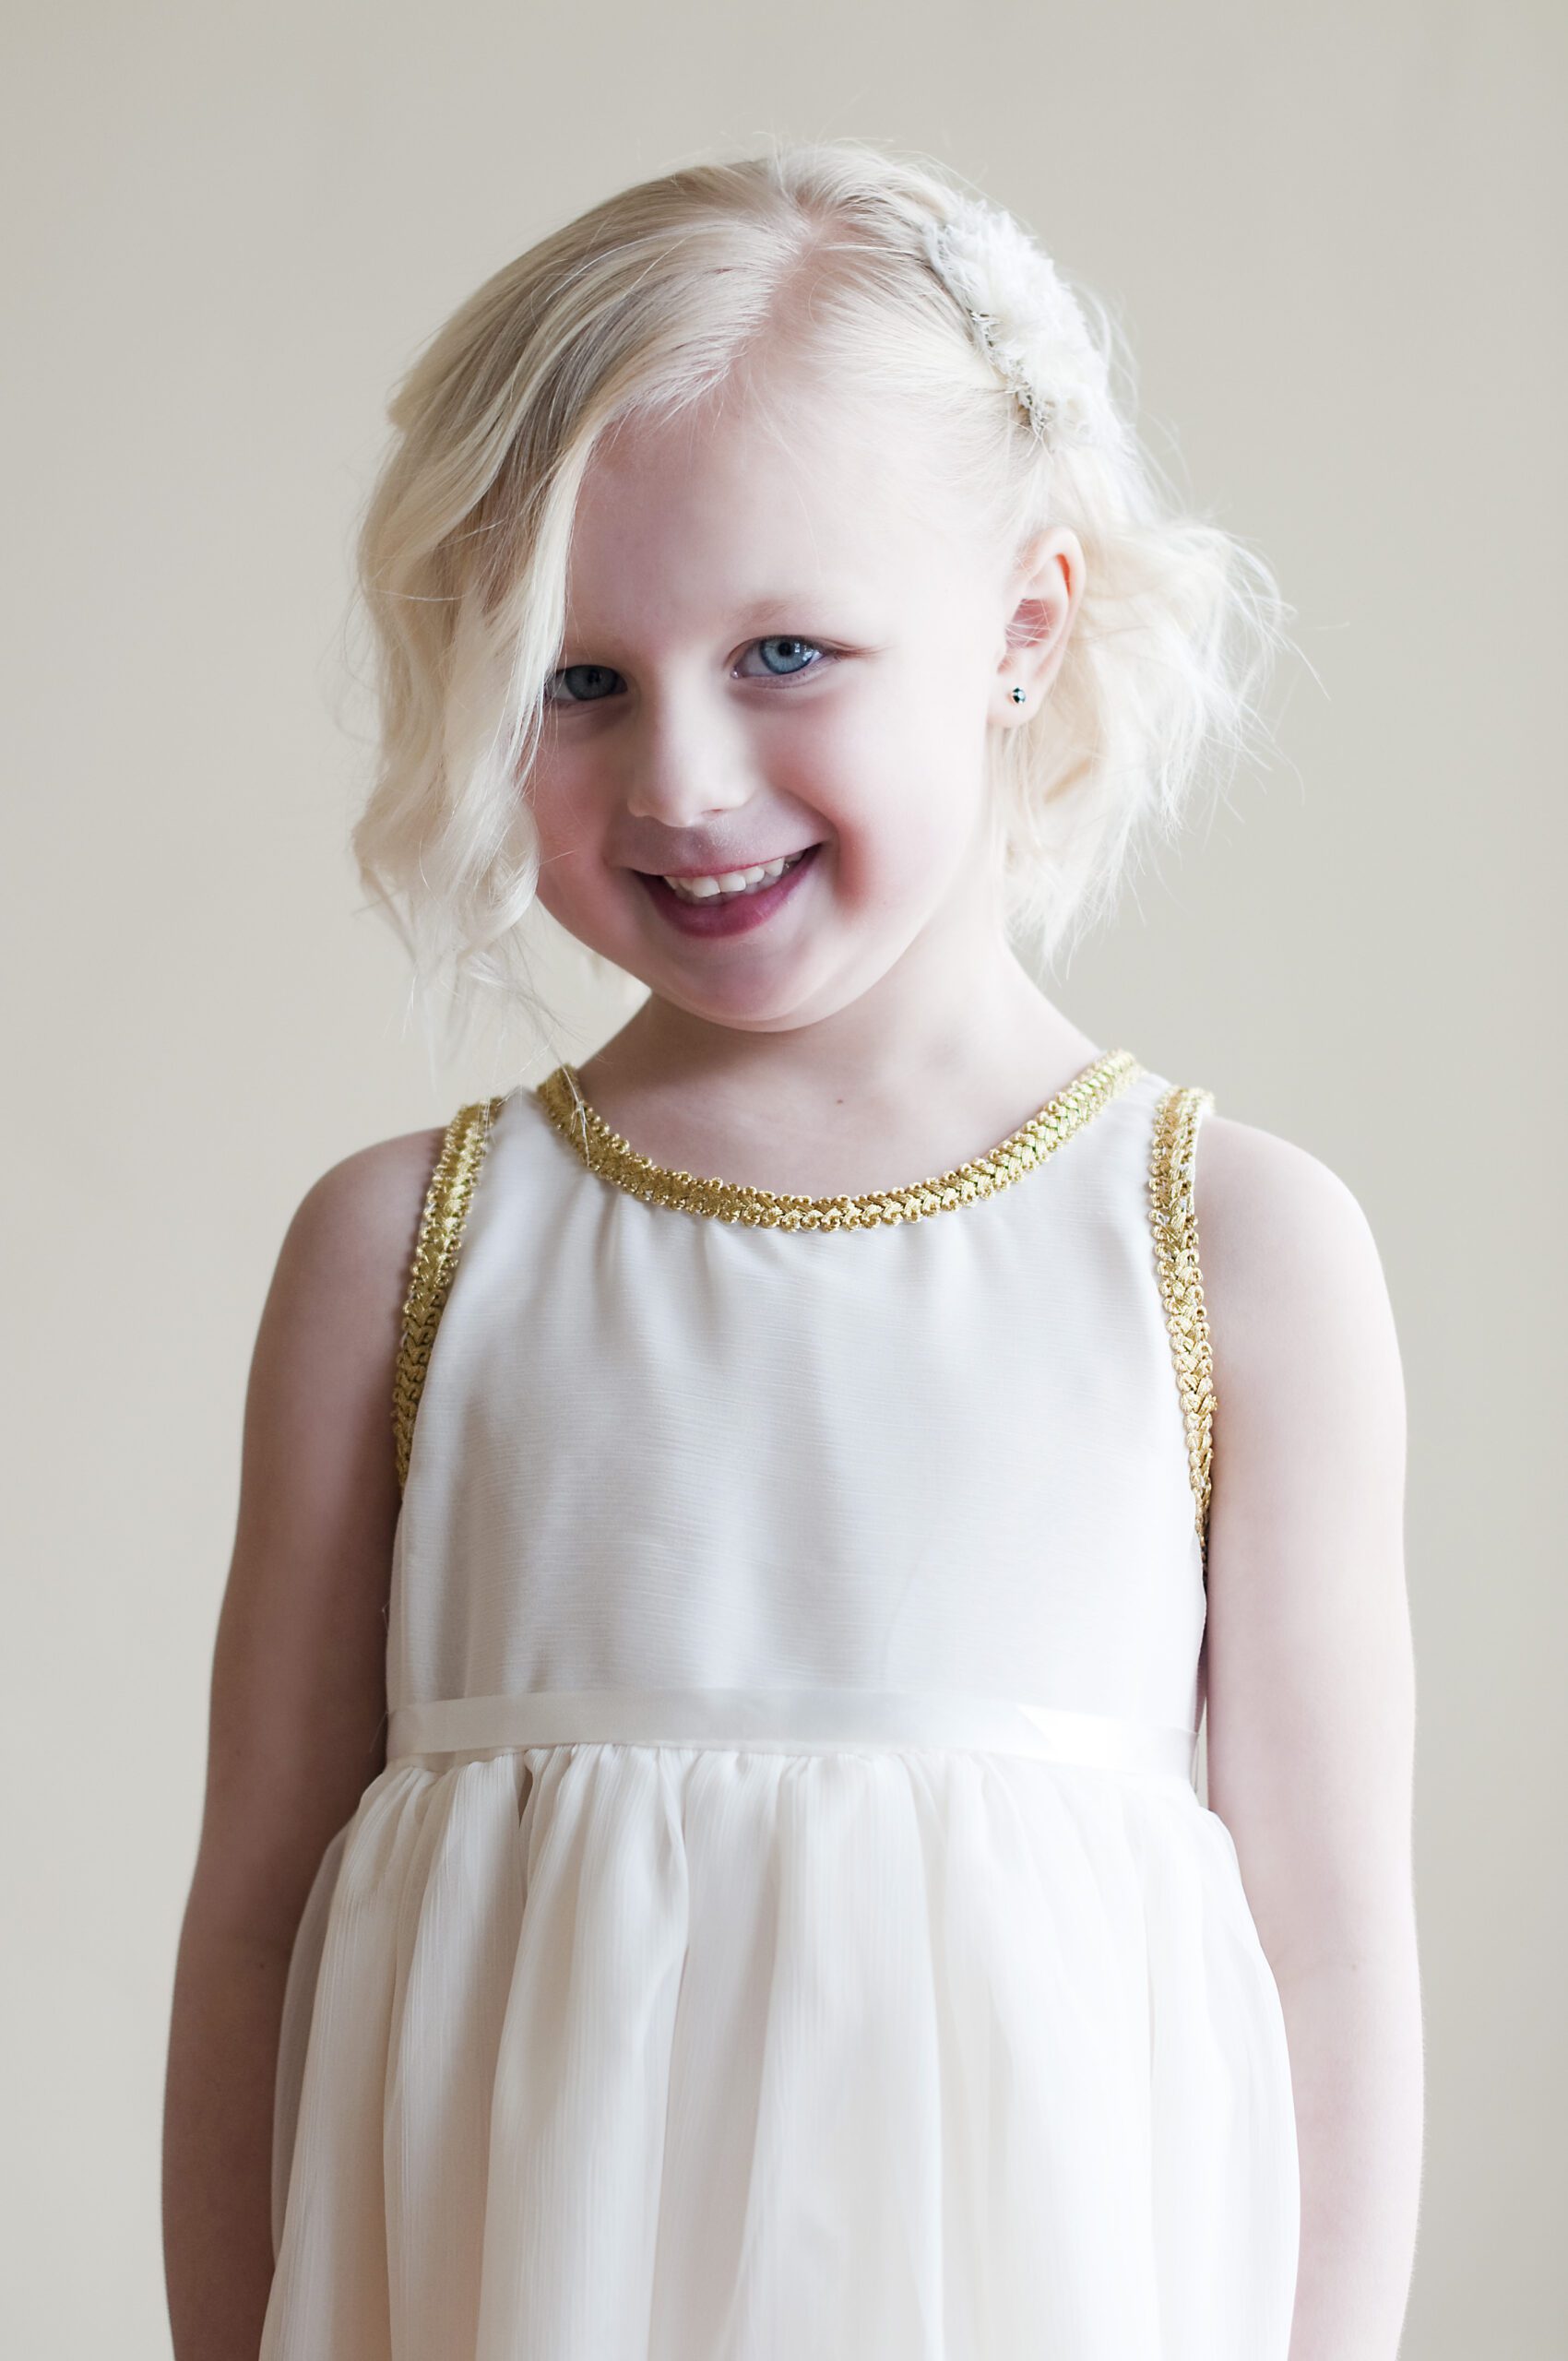 A photo of a little flower girl wearing an ivory chiffon dress with gold brocade on the collar